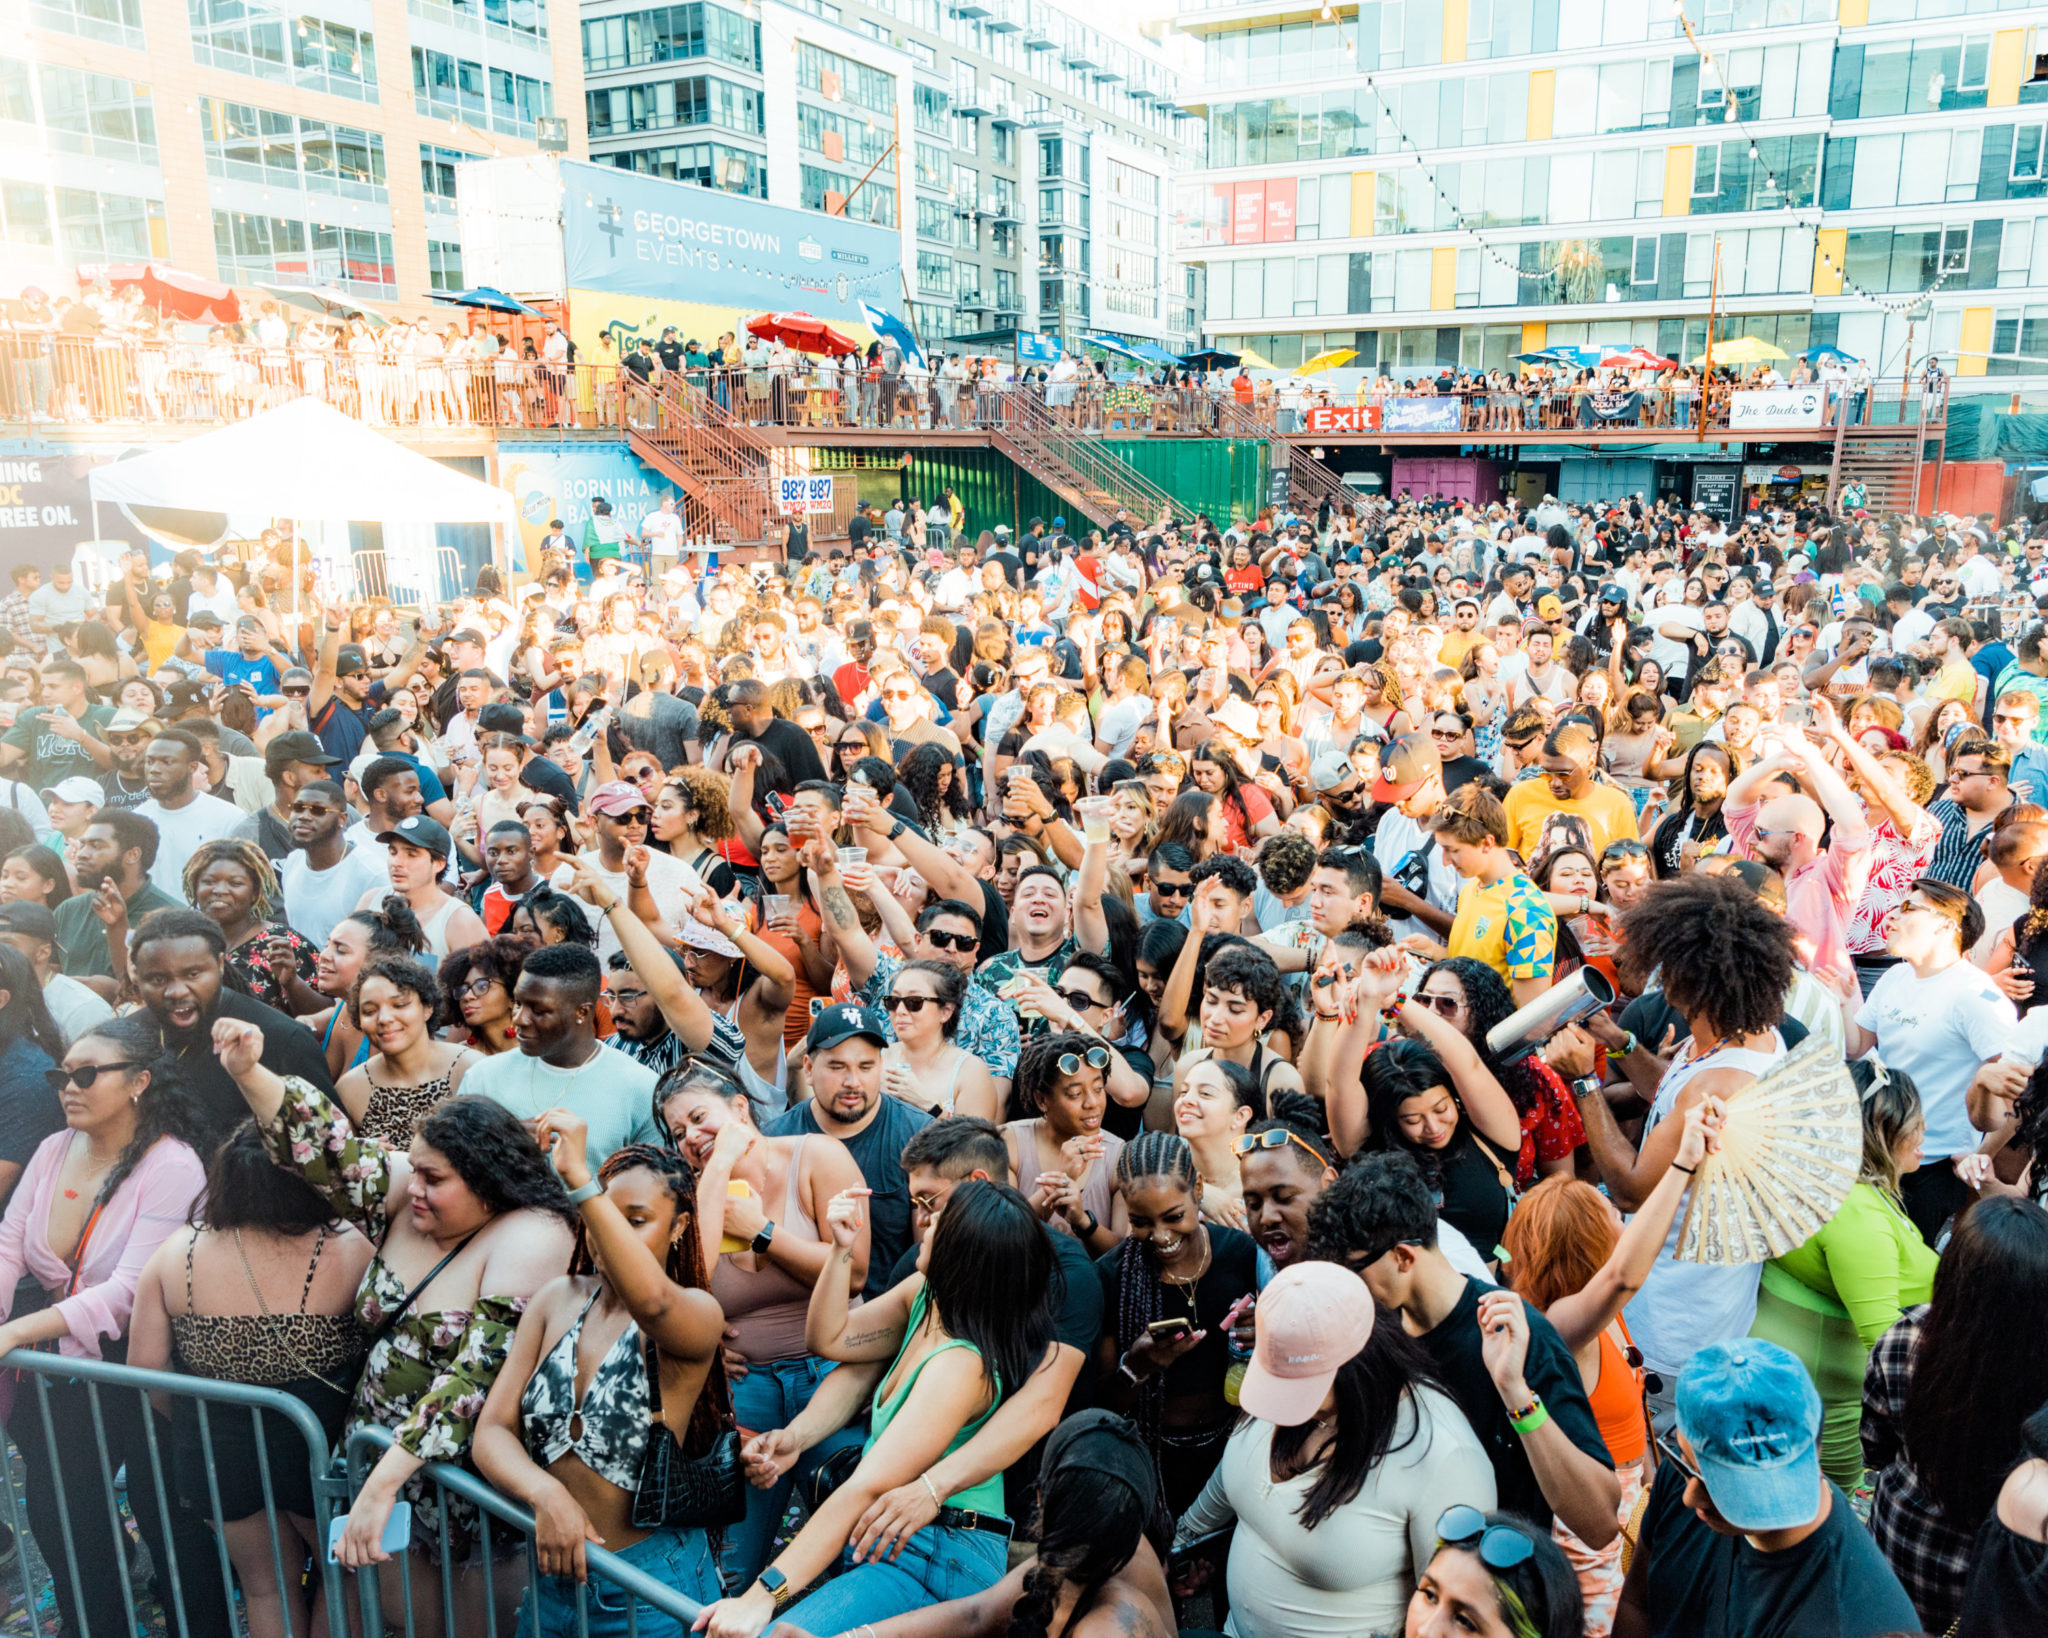 Adobo and Broccoli City Are Bringing a New AfroLatin Music Festival to